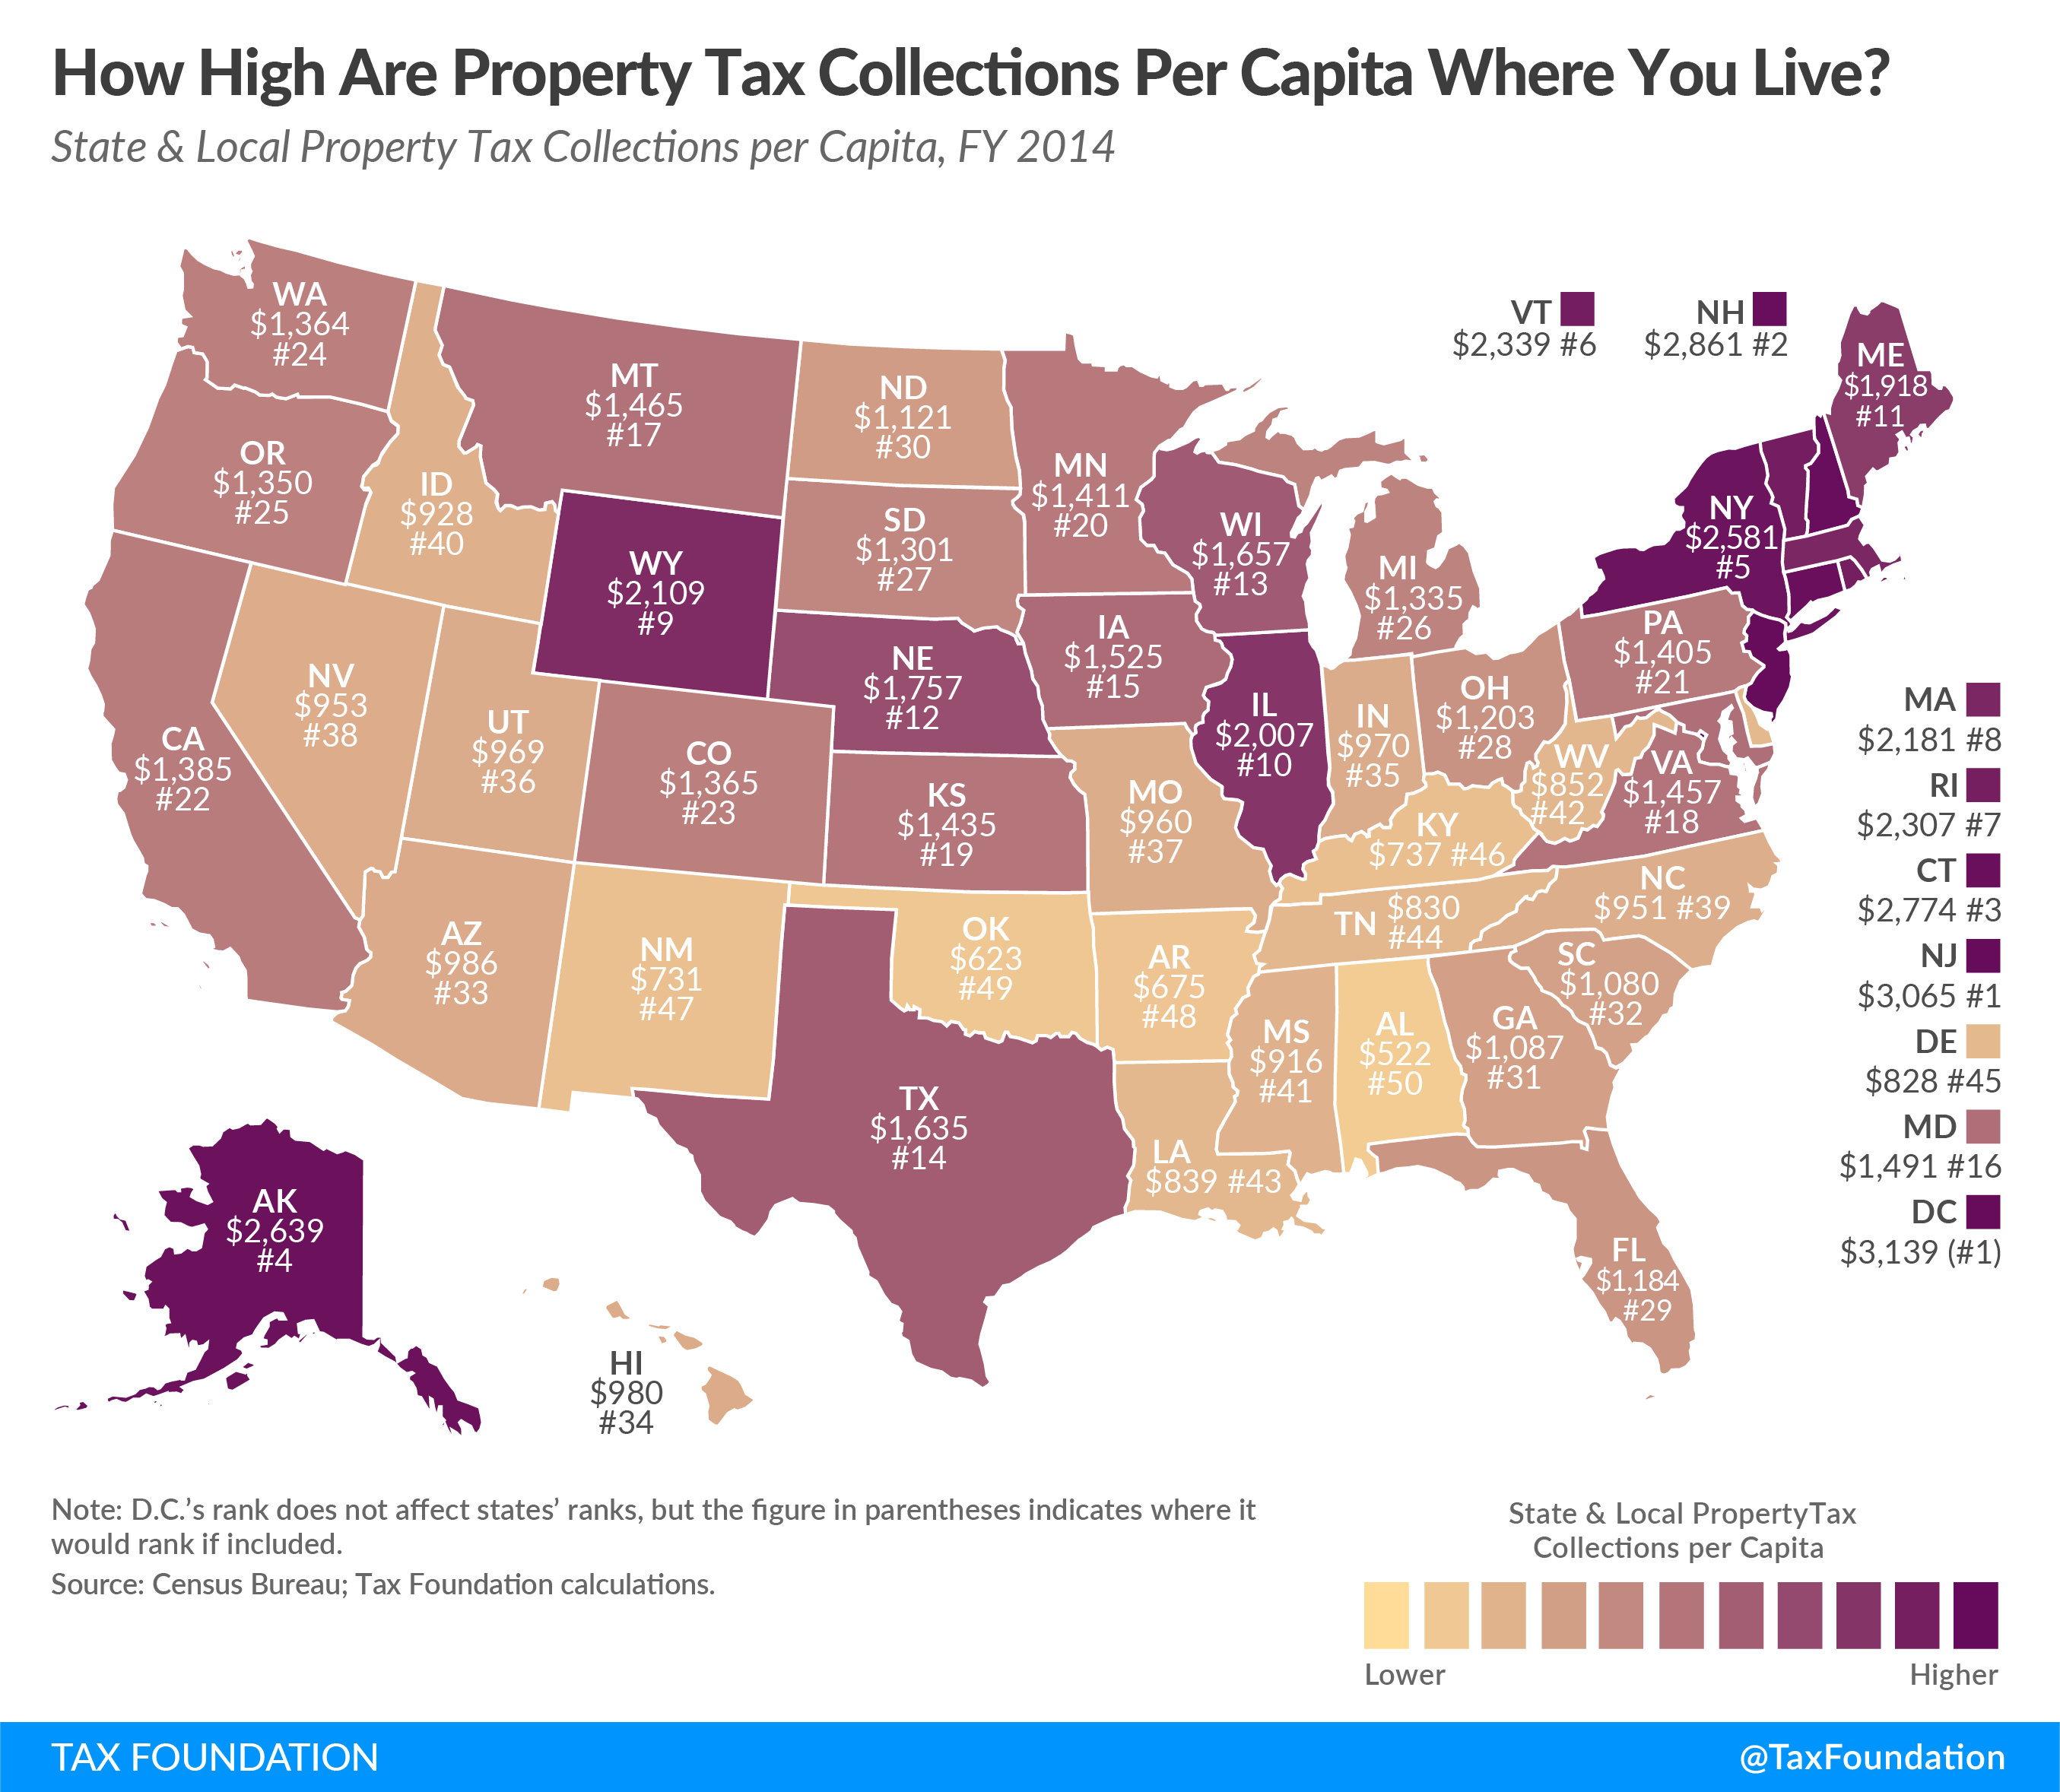 State and Local Property Taxes Per Capita